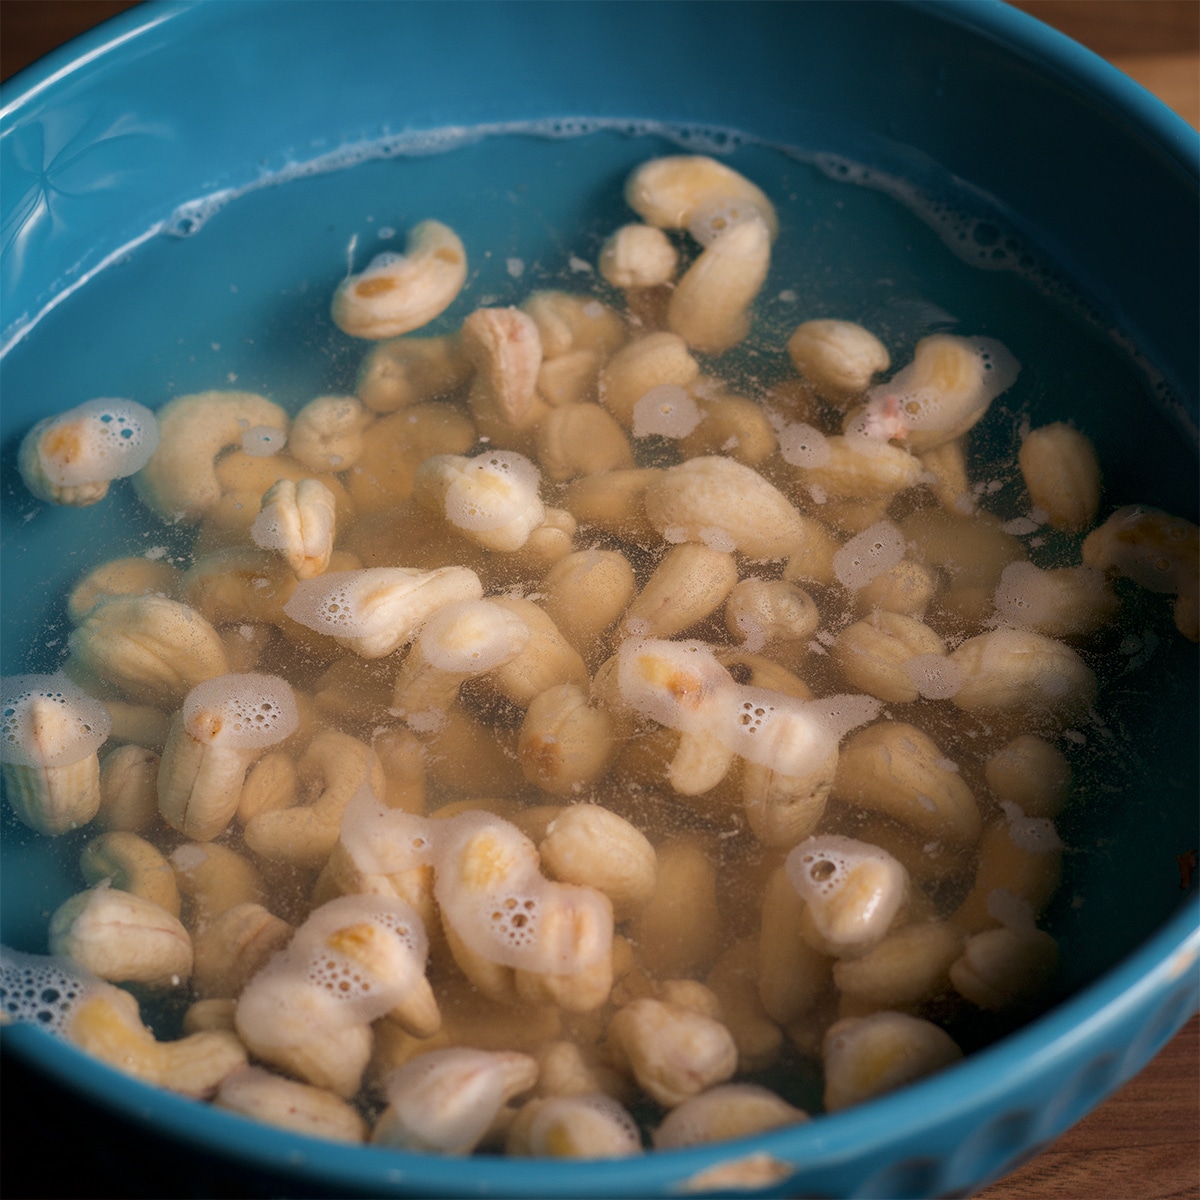 A bowl of raw cashews soaking in hot water.